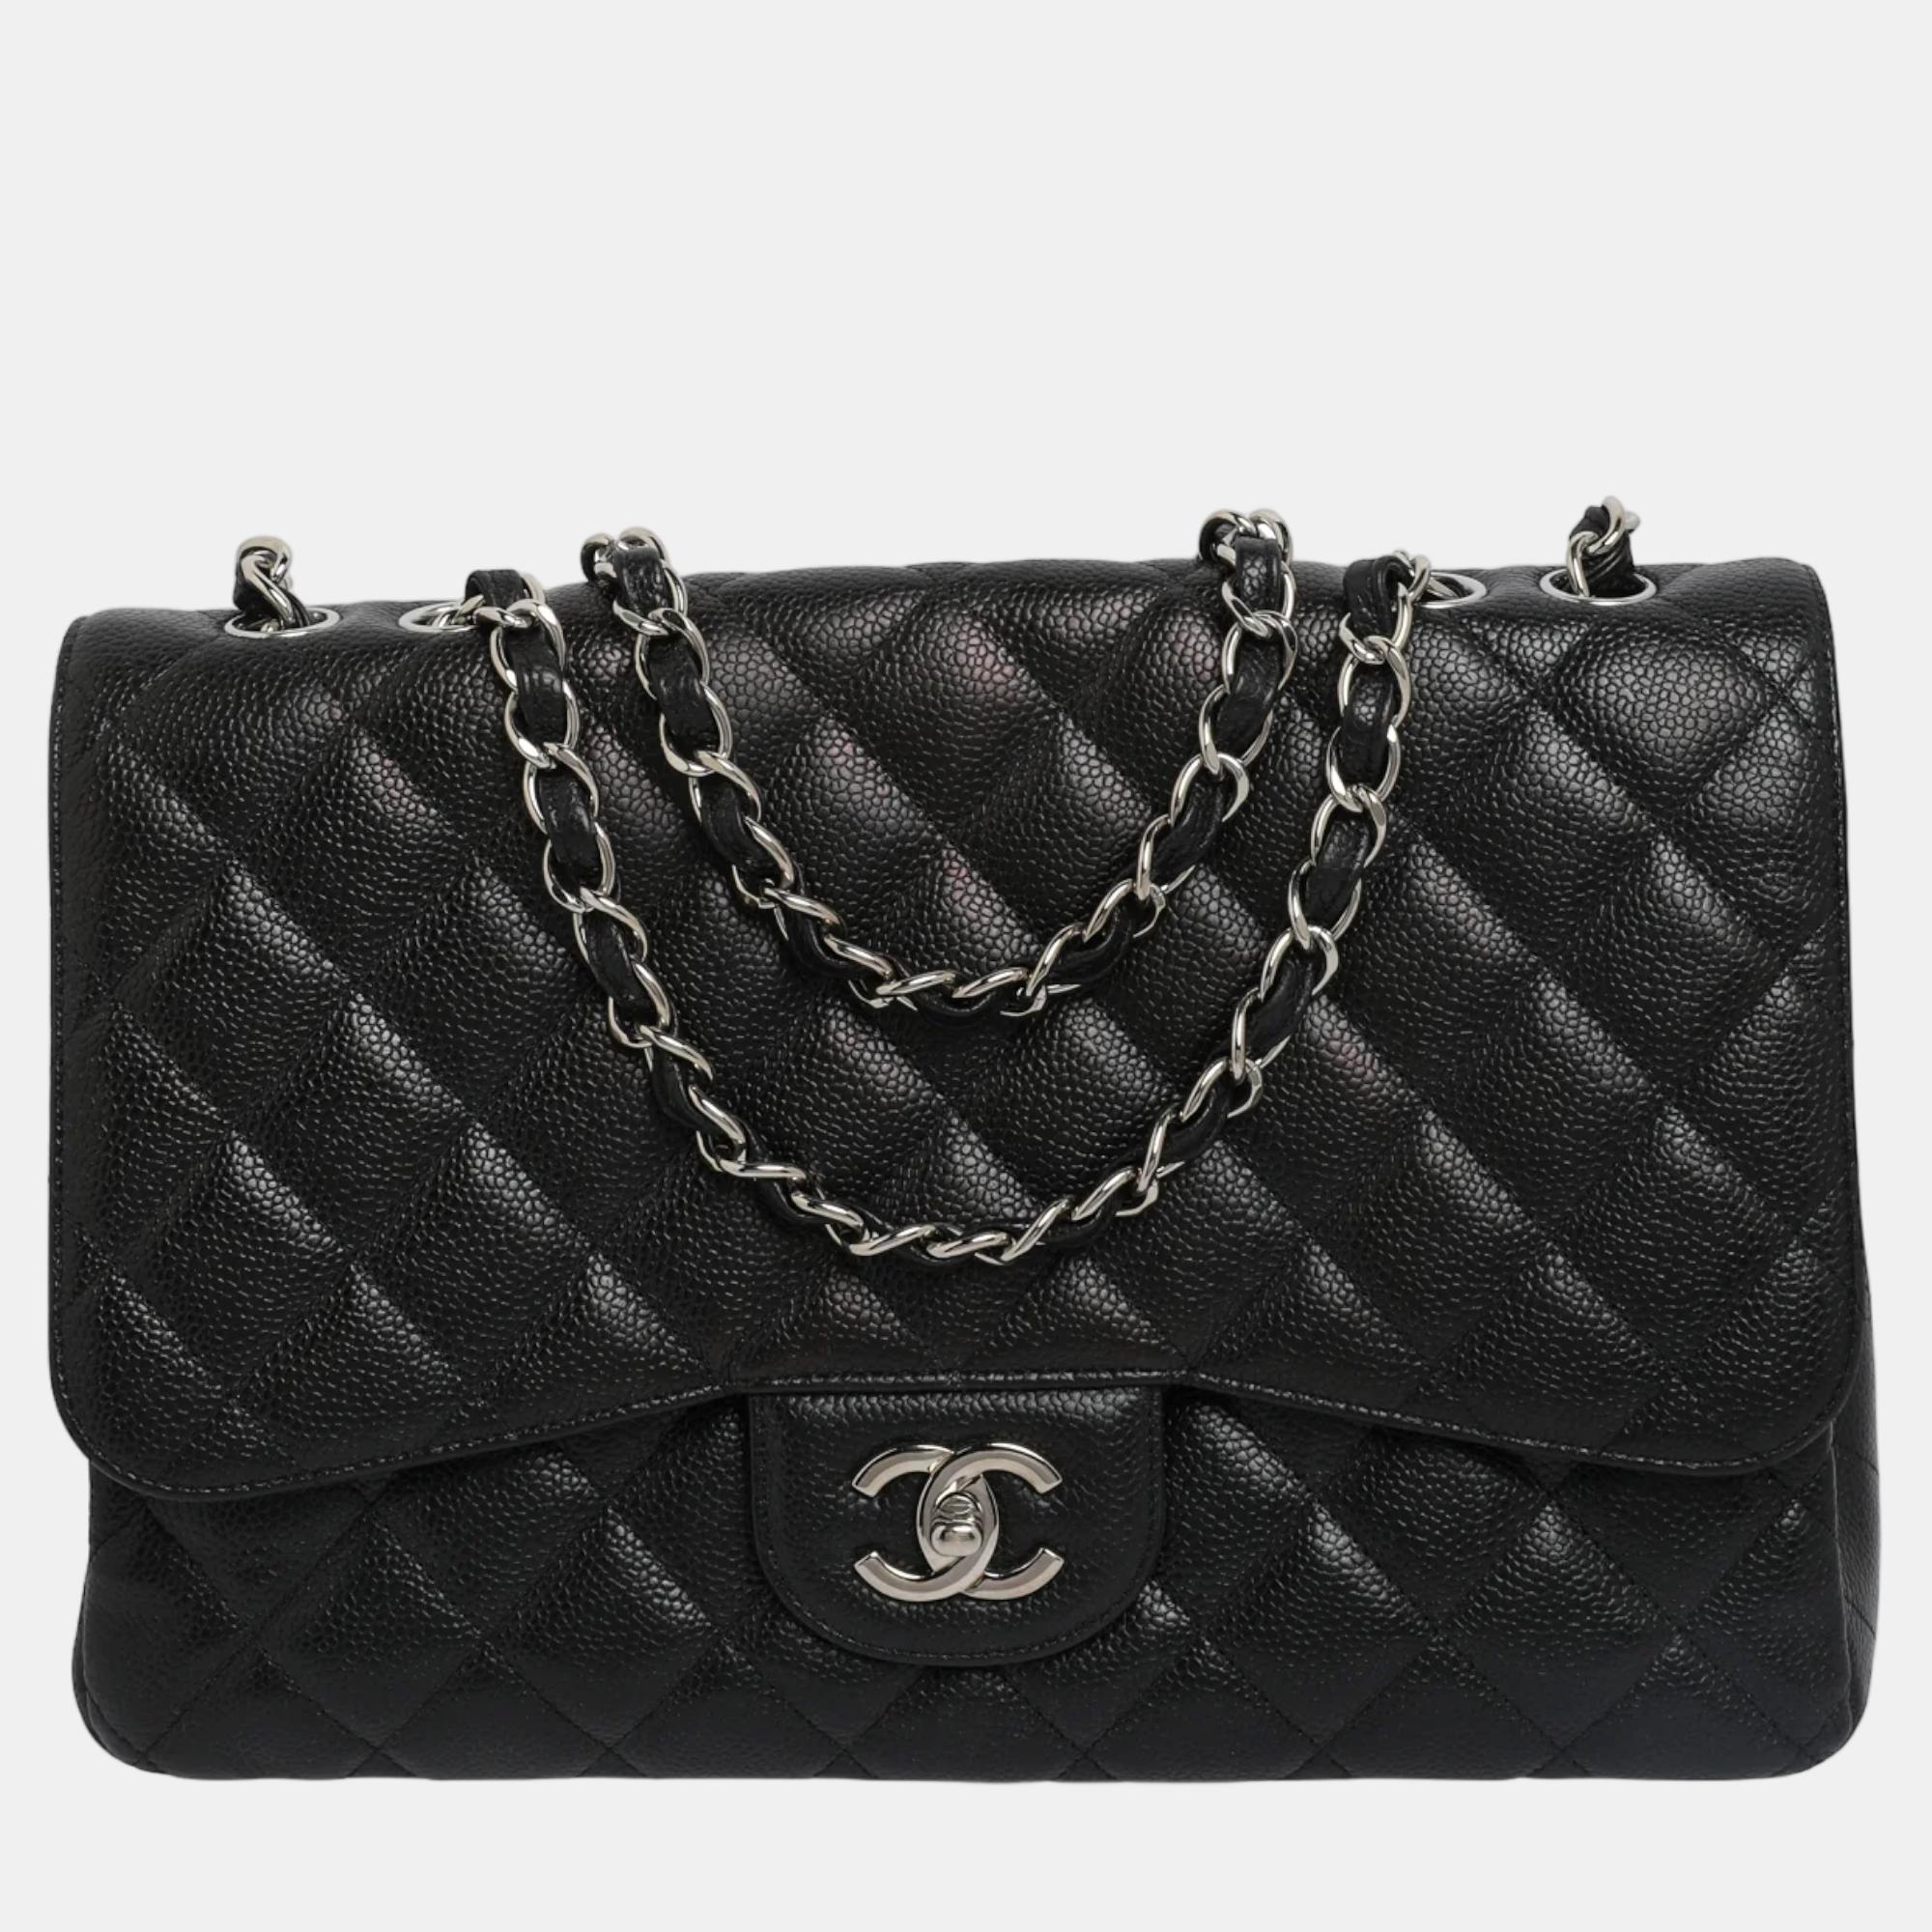 Chanel black caviar quilted maxi single flap bag